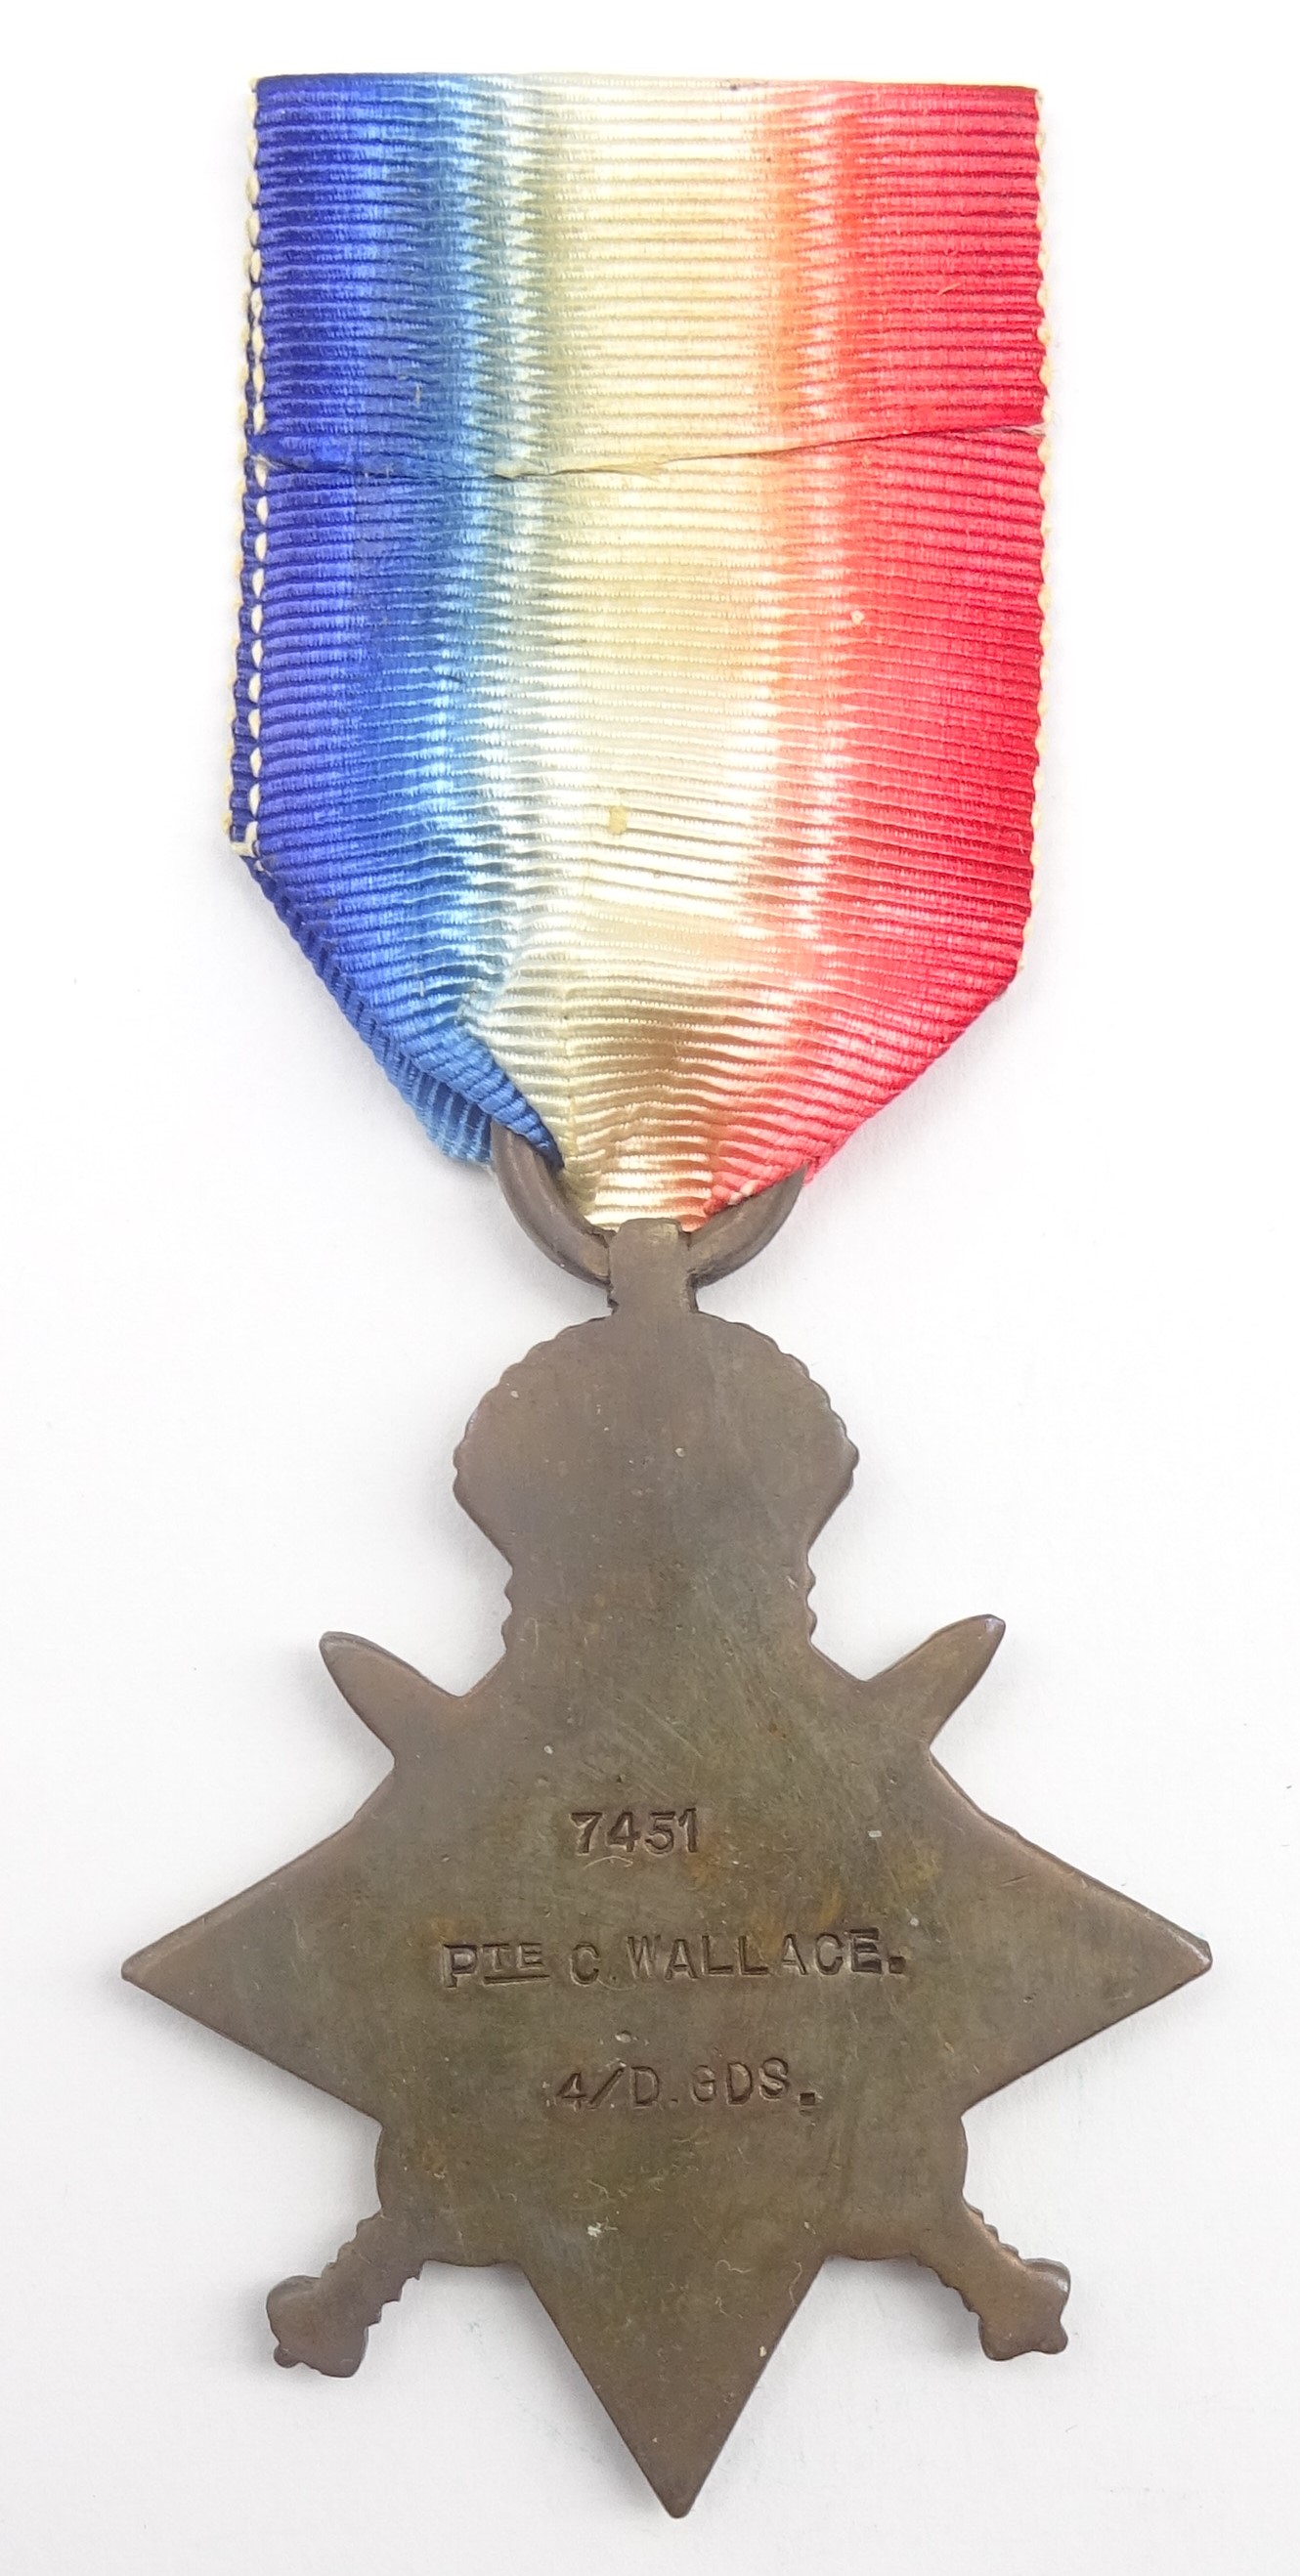 WW1 1914 Mons Star awarded to 7451 Pte. C. Wallace 4.D. Gds. - Image 2 of 2